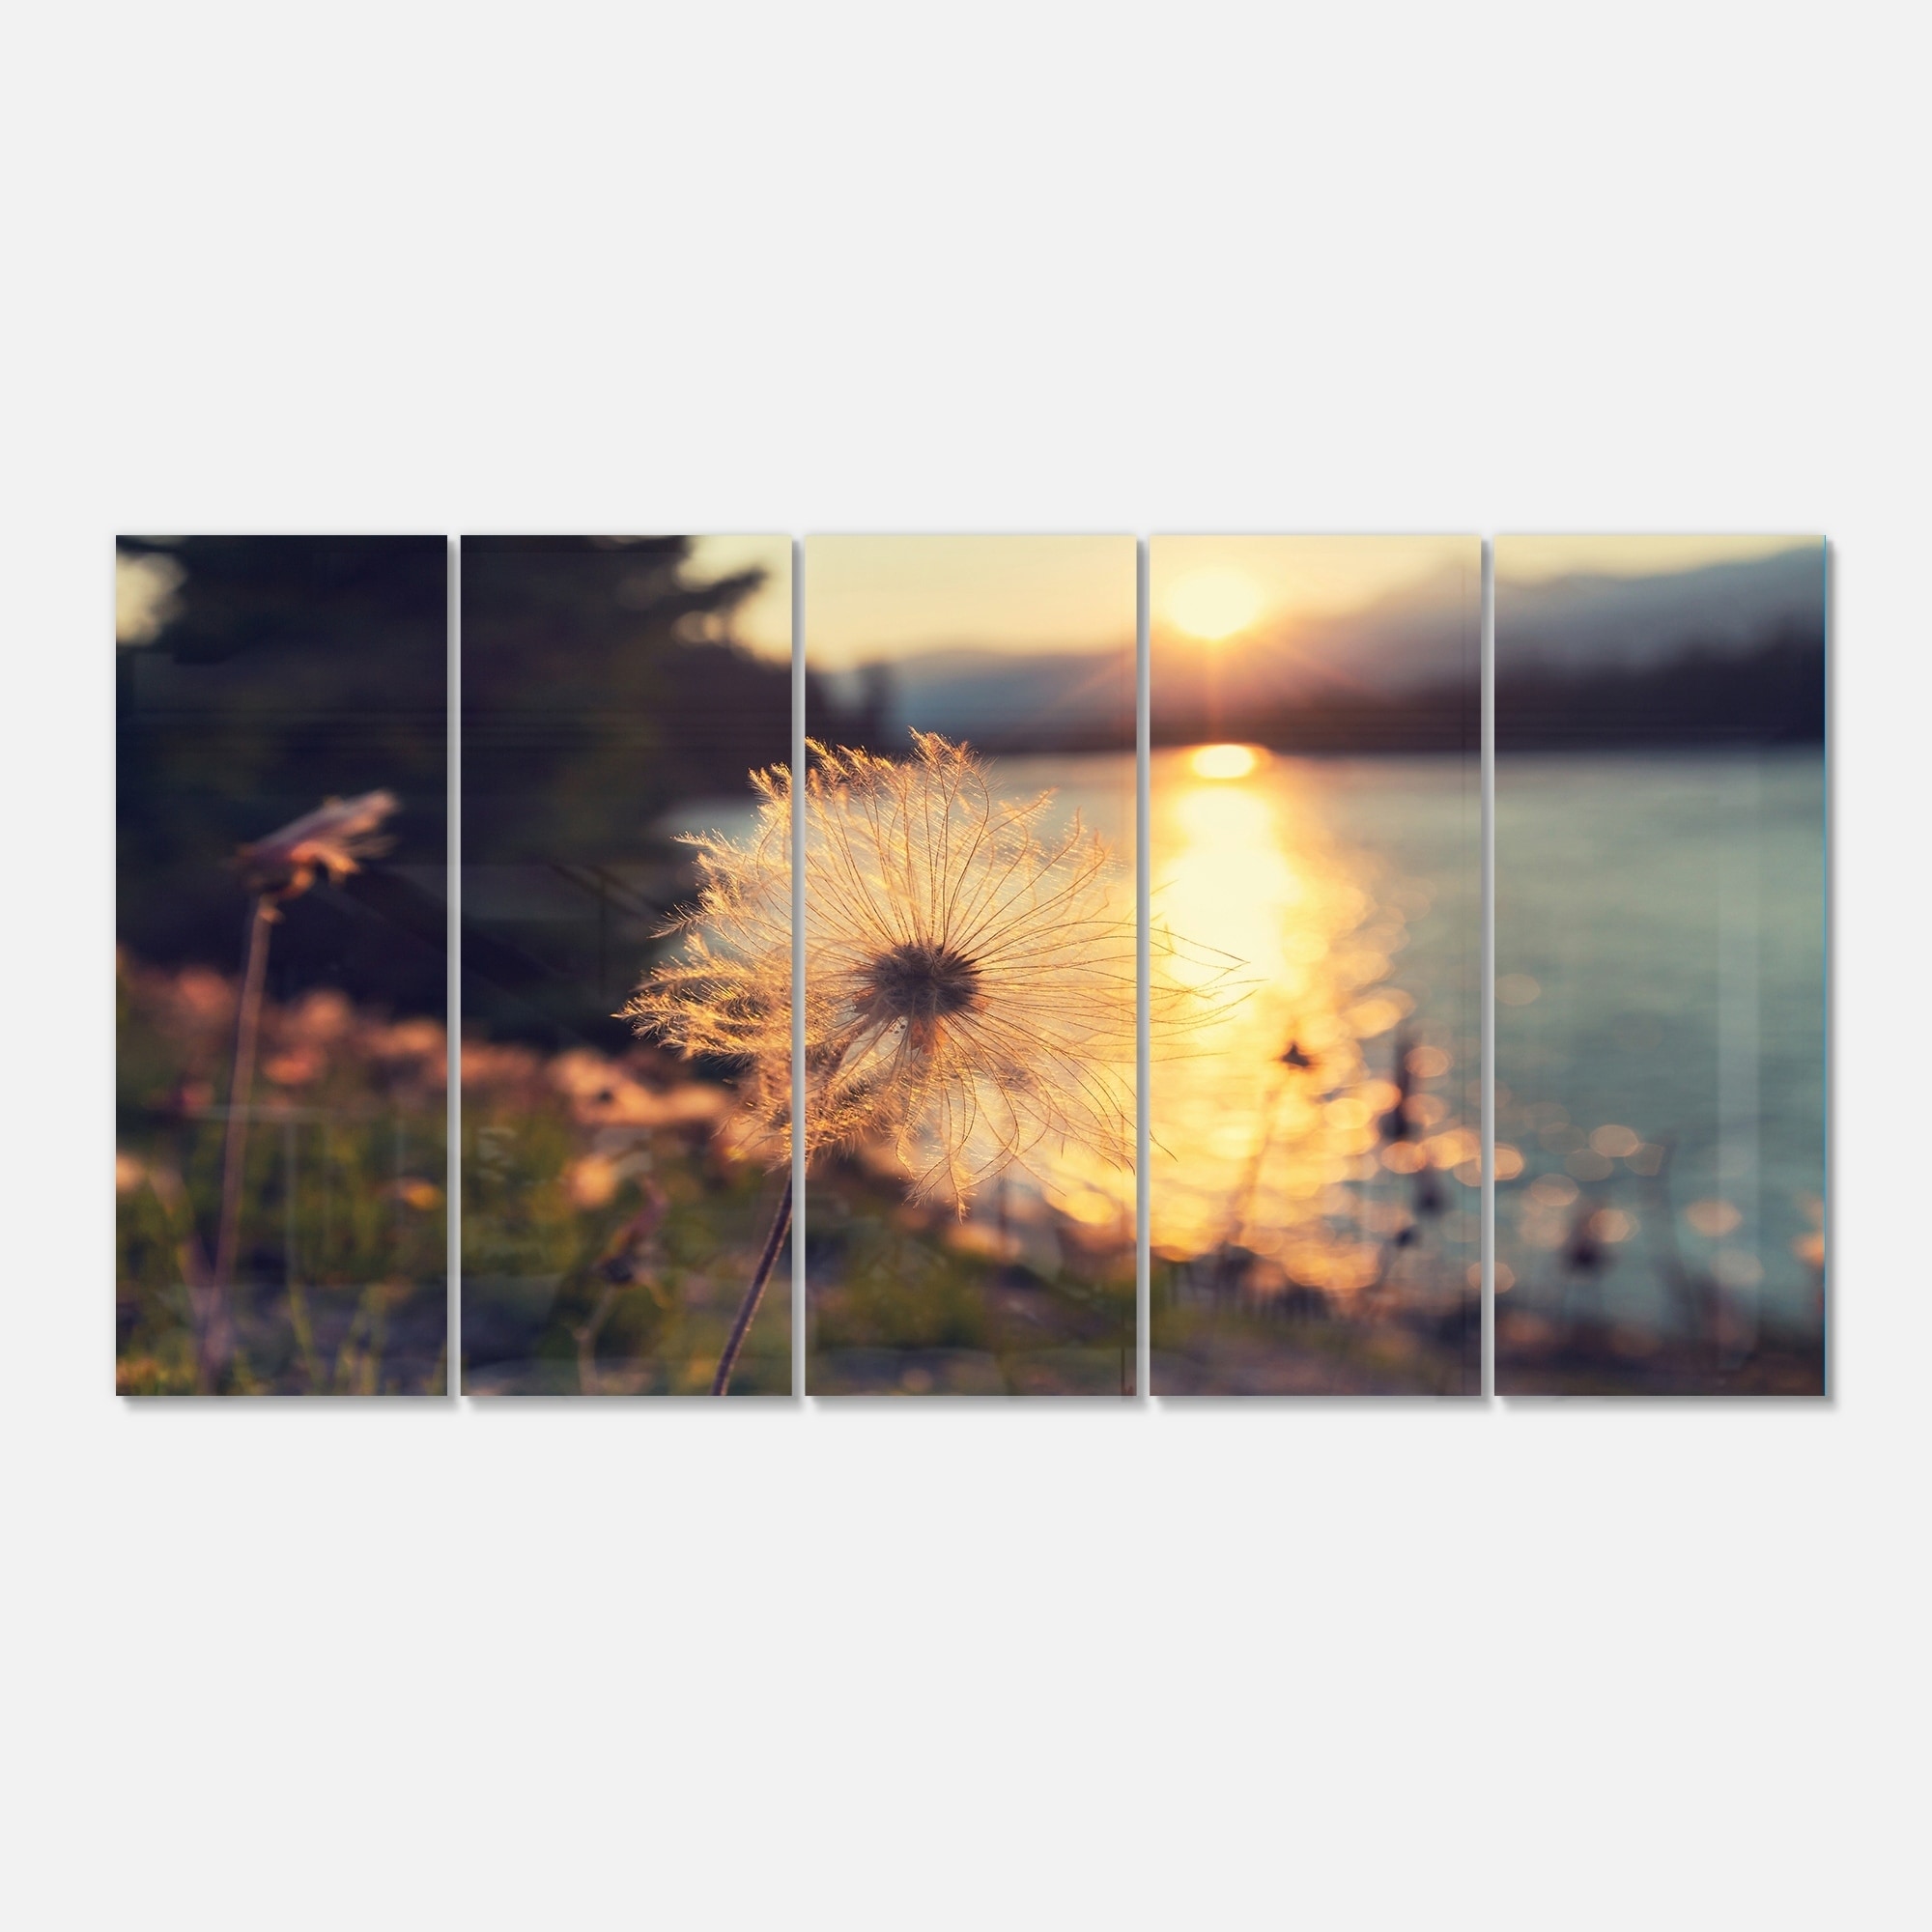 Designart 'Arctic Cotton Flowers At Sunset' Floral Glossy Metal Wall Art